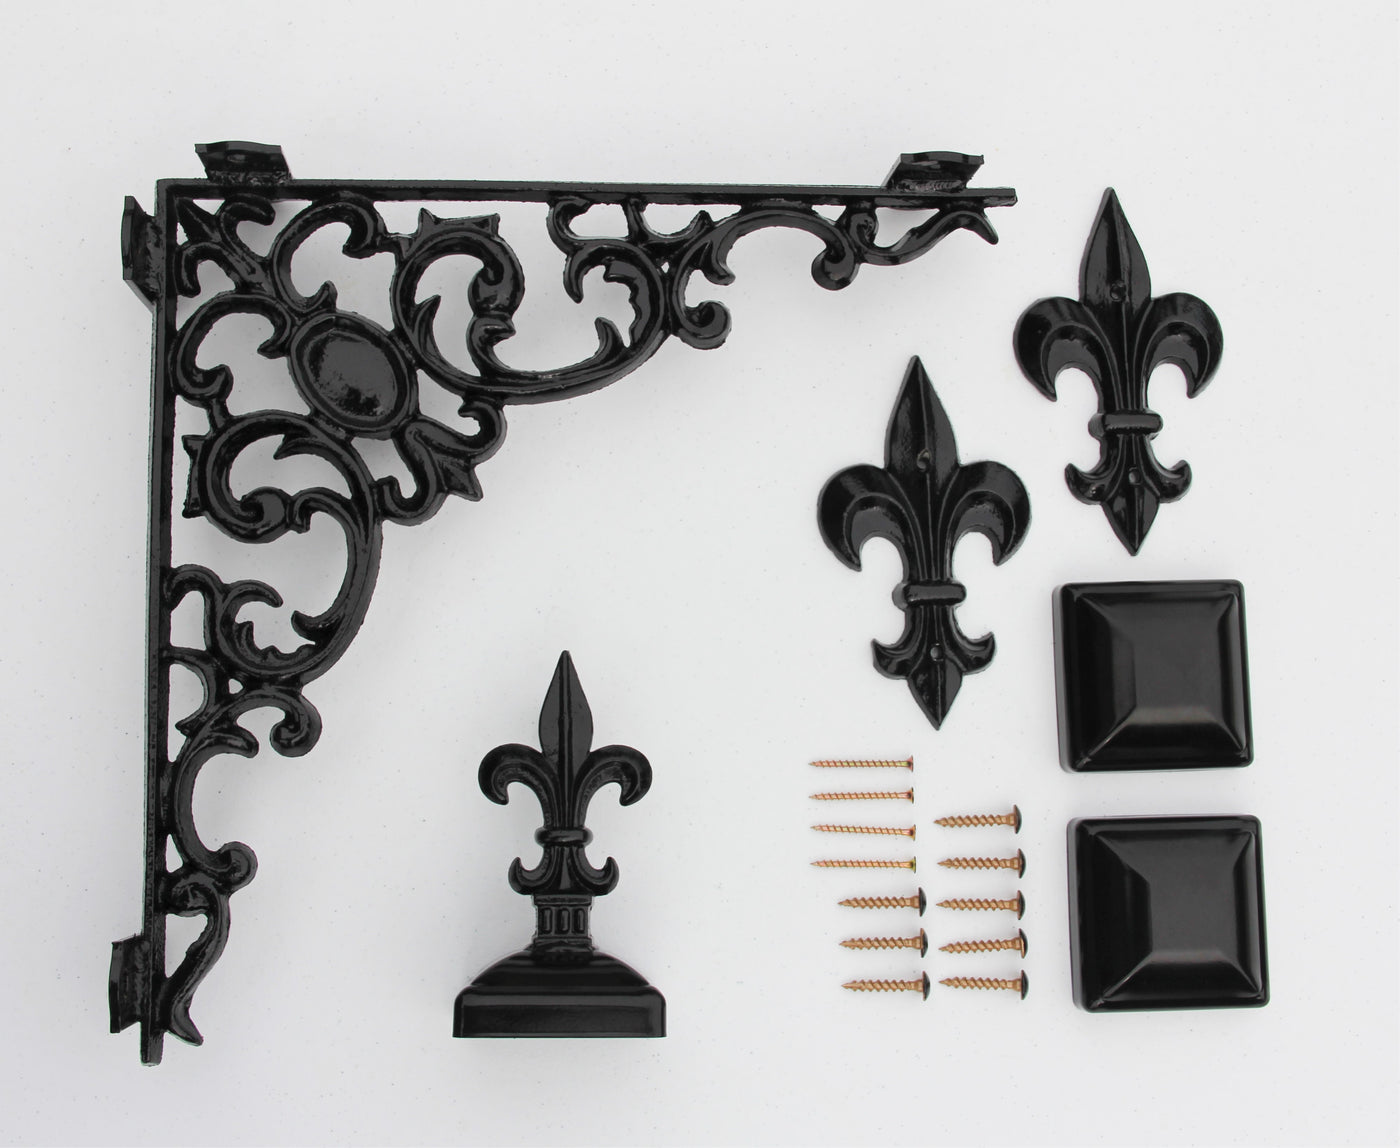 Fleur De Lis Wrought Iron Mailbox Post Dress Up Kit (Mailbox and post NOT included) - Madison Iron and Wood - Mailbox Post Decor - metal outdoor decor - Steel deocrations - american made products - veteran owned business products - fencing decorations - fencing supplies - custom wall decorations - personalized wall signs - steel - decorative post caps - steel post caps - metal post caps - brackets - structural brackets - home improvement - easter - easter decorations - easter gift - easter yard decor